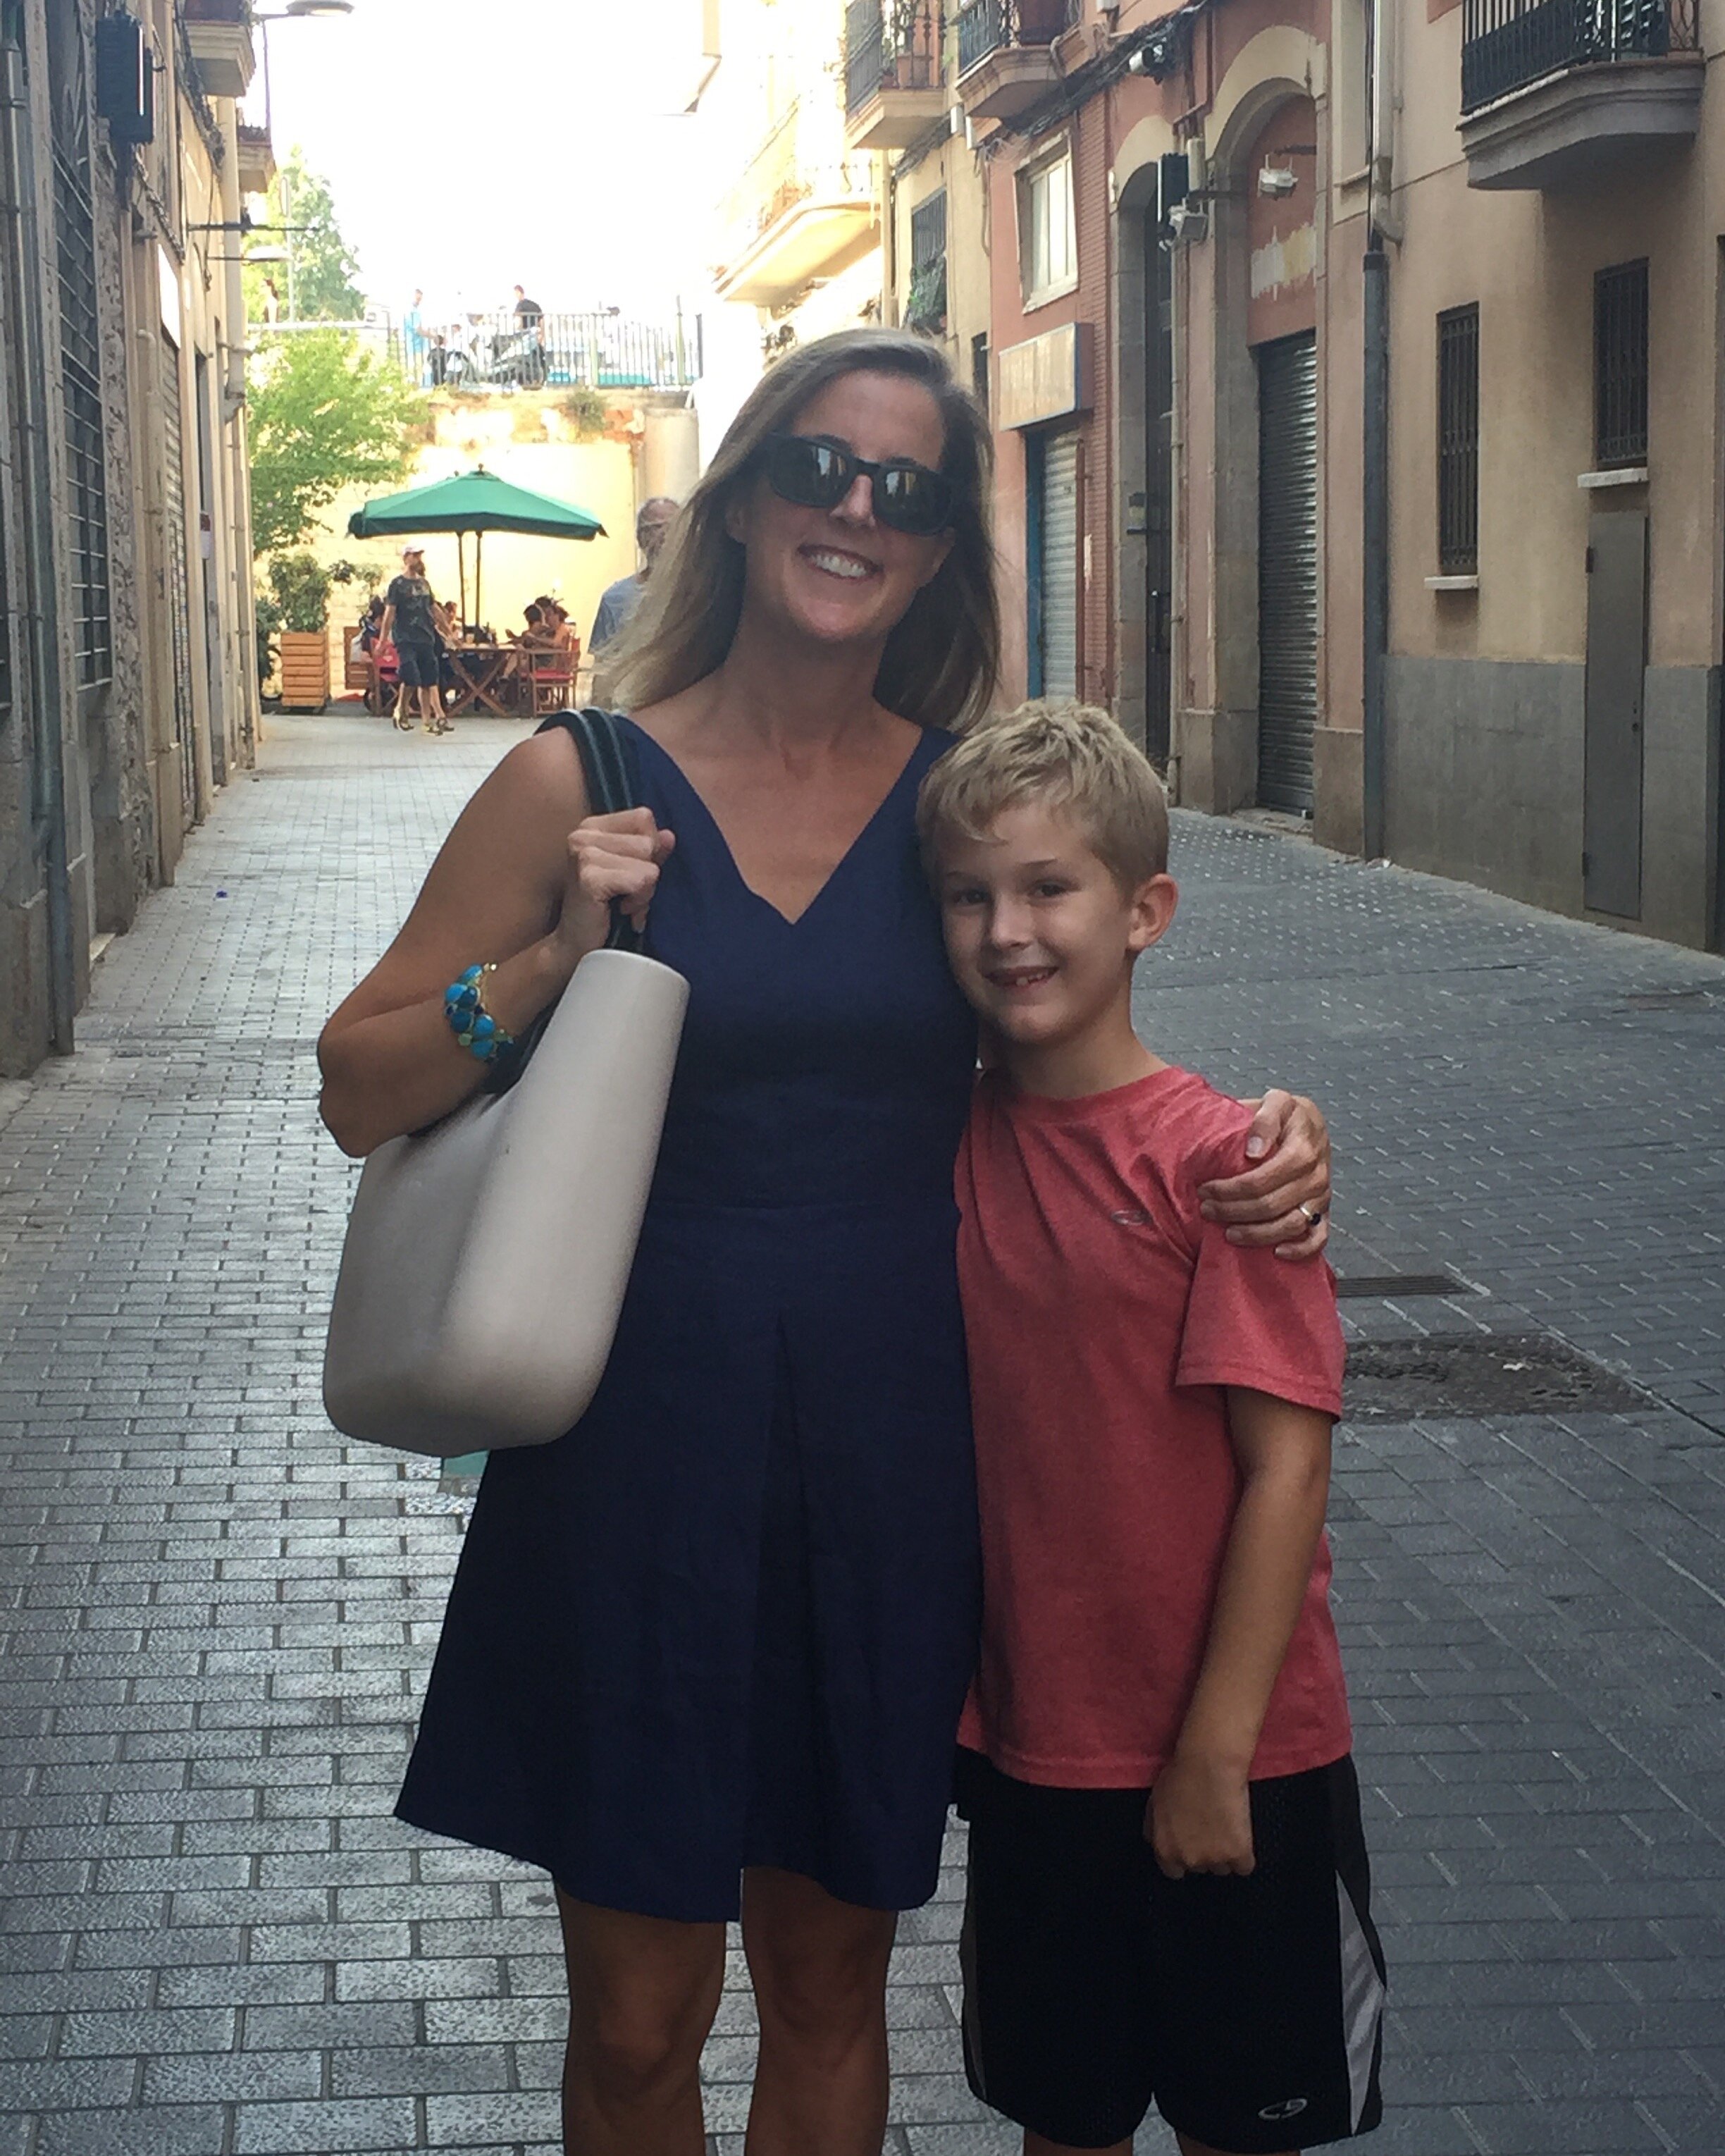 Happiness in a Barcelona street. I bought this fake bag from a street vendor, just like Charlotte thinks of doing on her day tour.